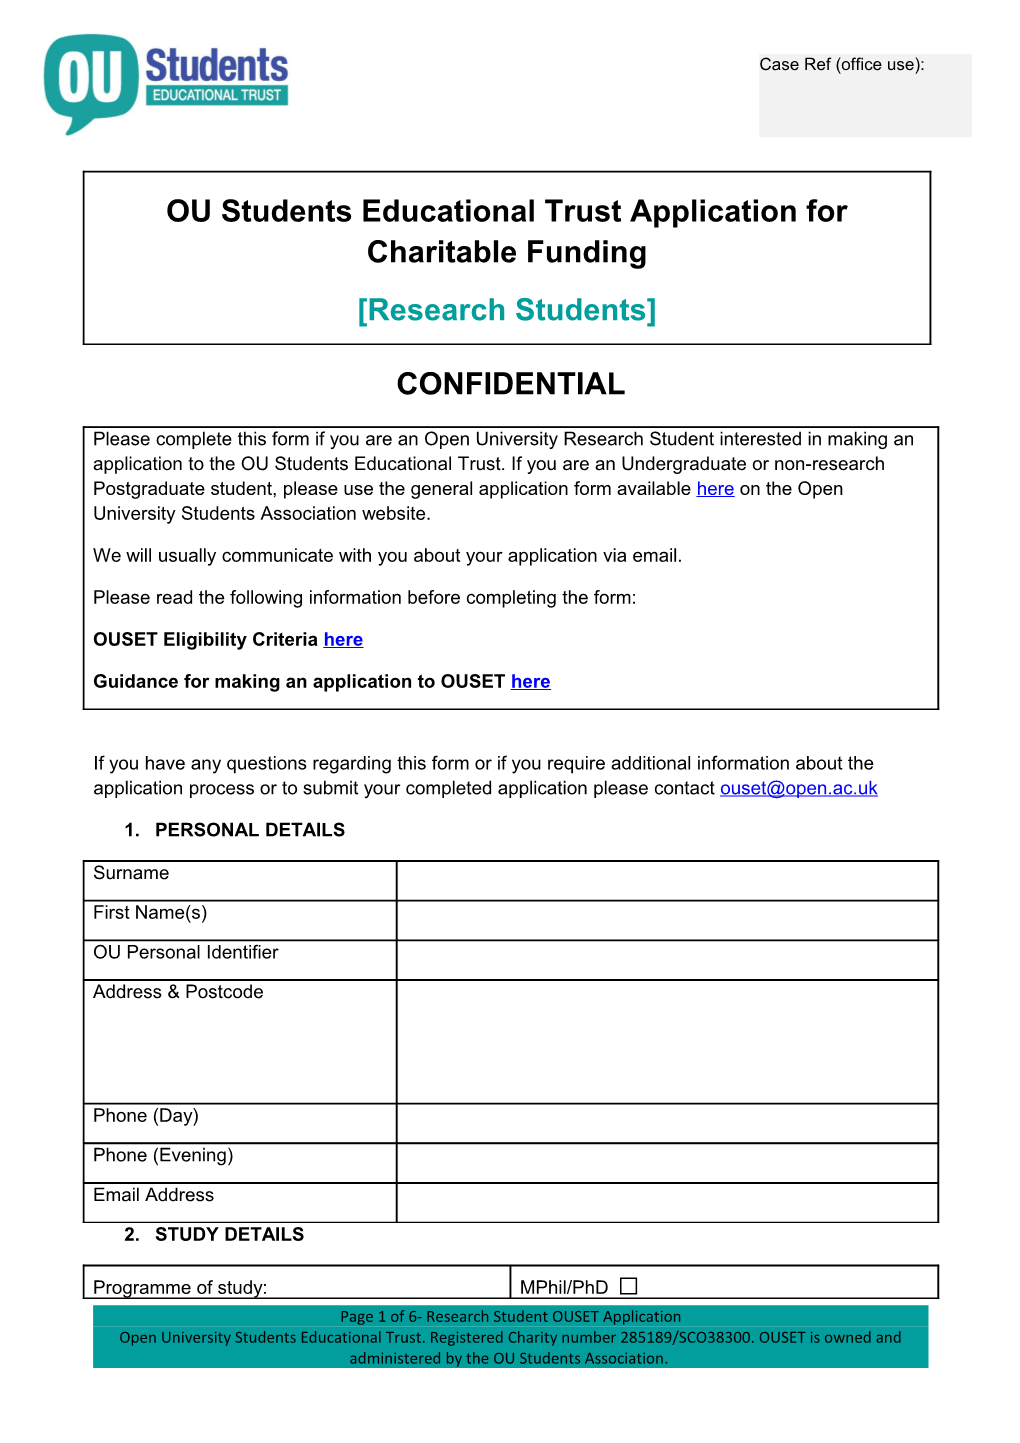 OU Students Educational Trust Application for Charitable Funding Research Students CONFIDENTIAL